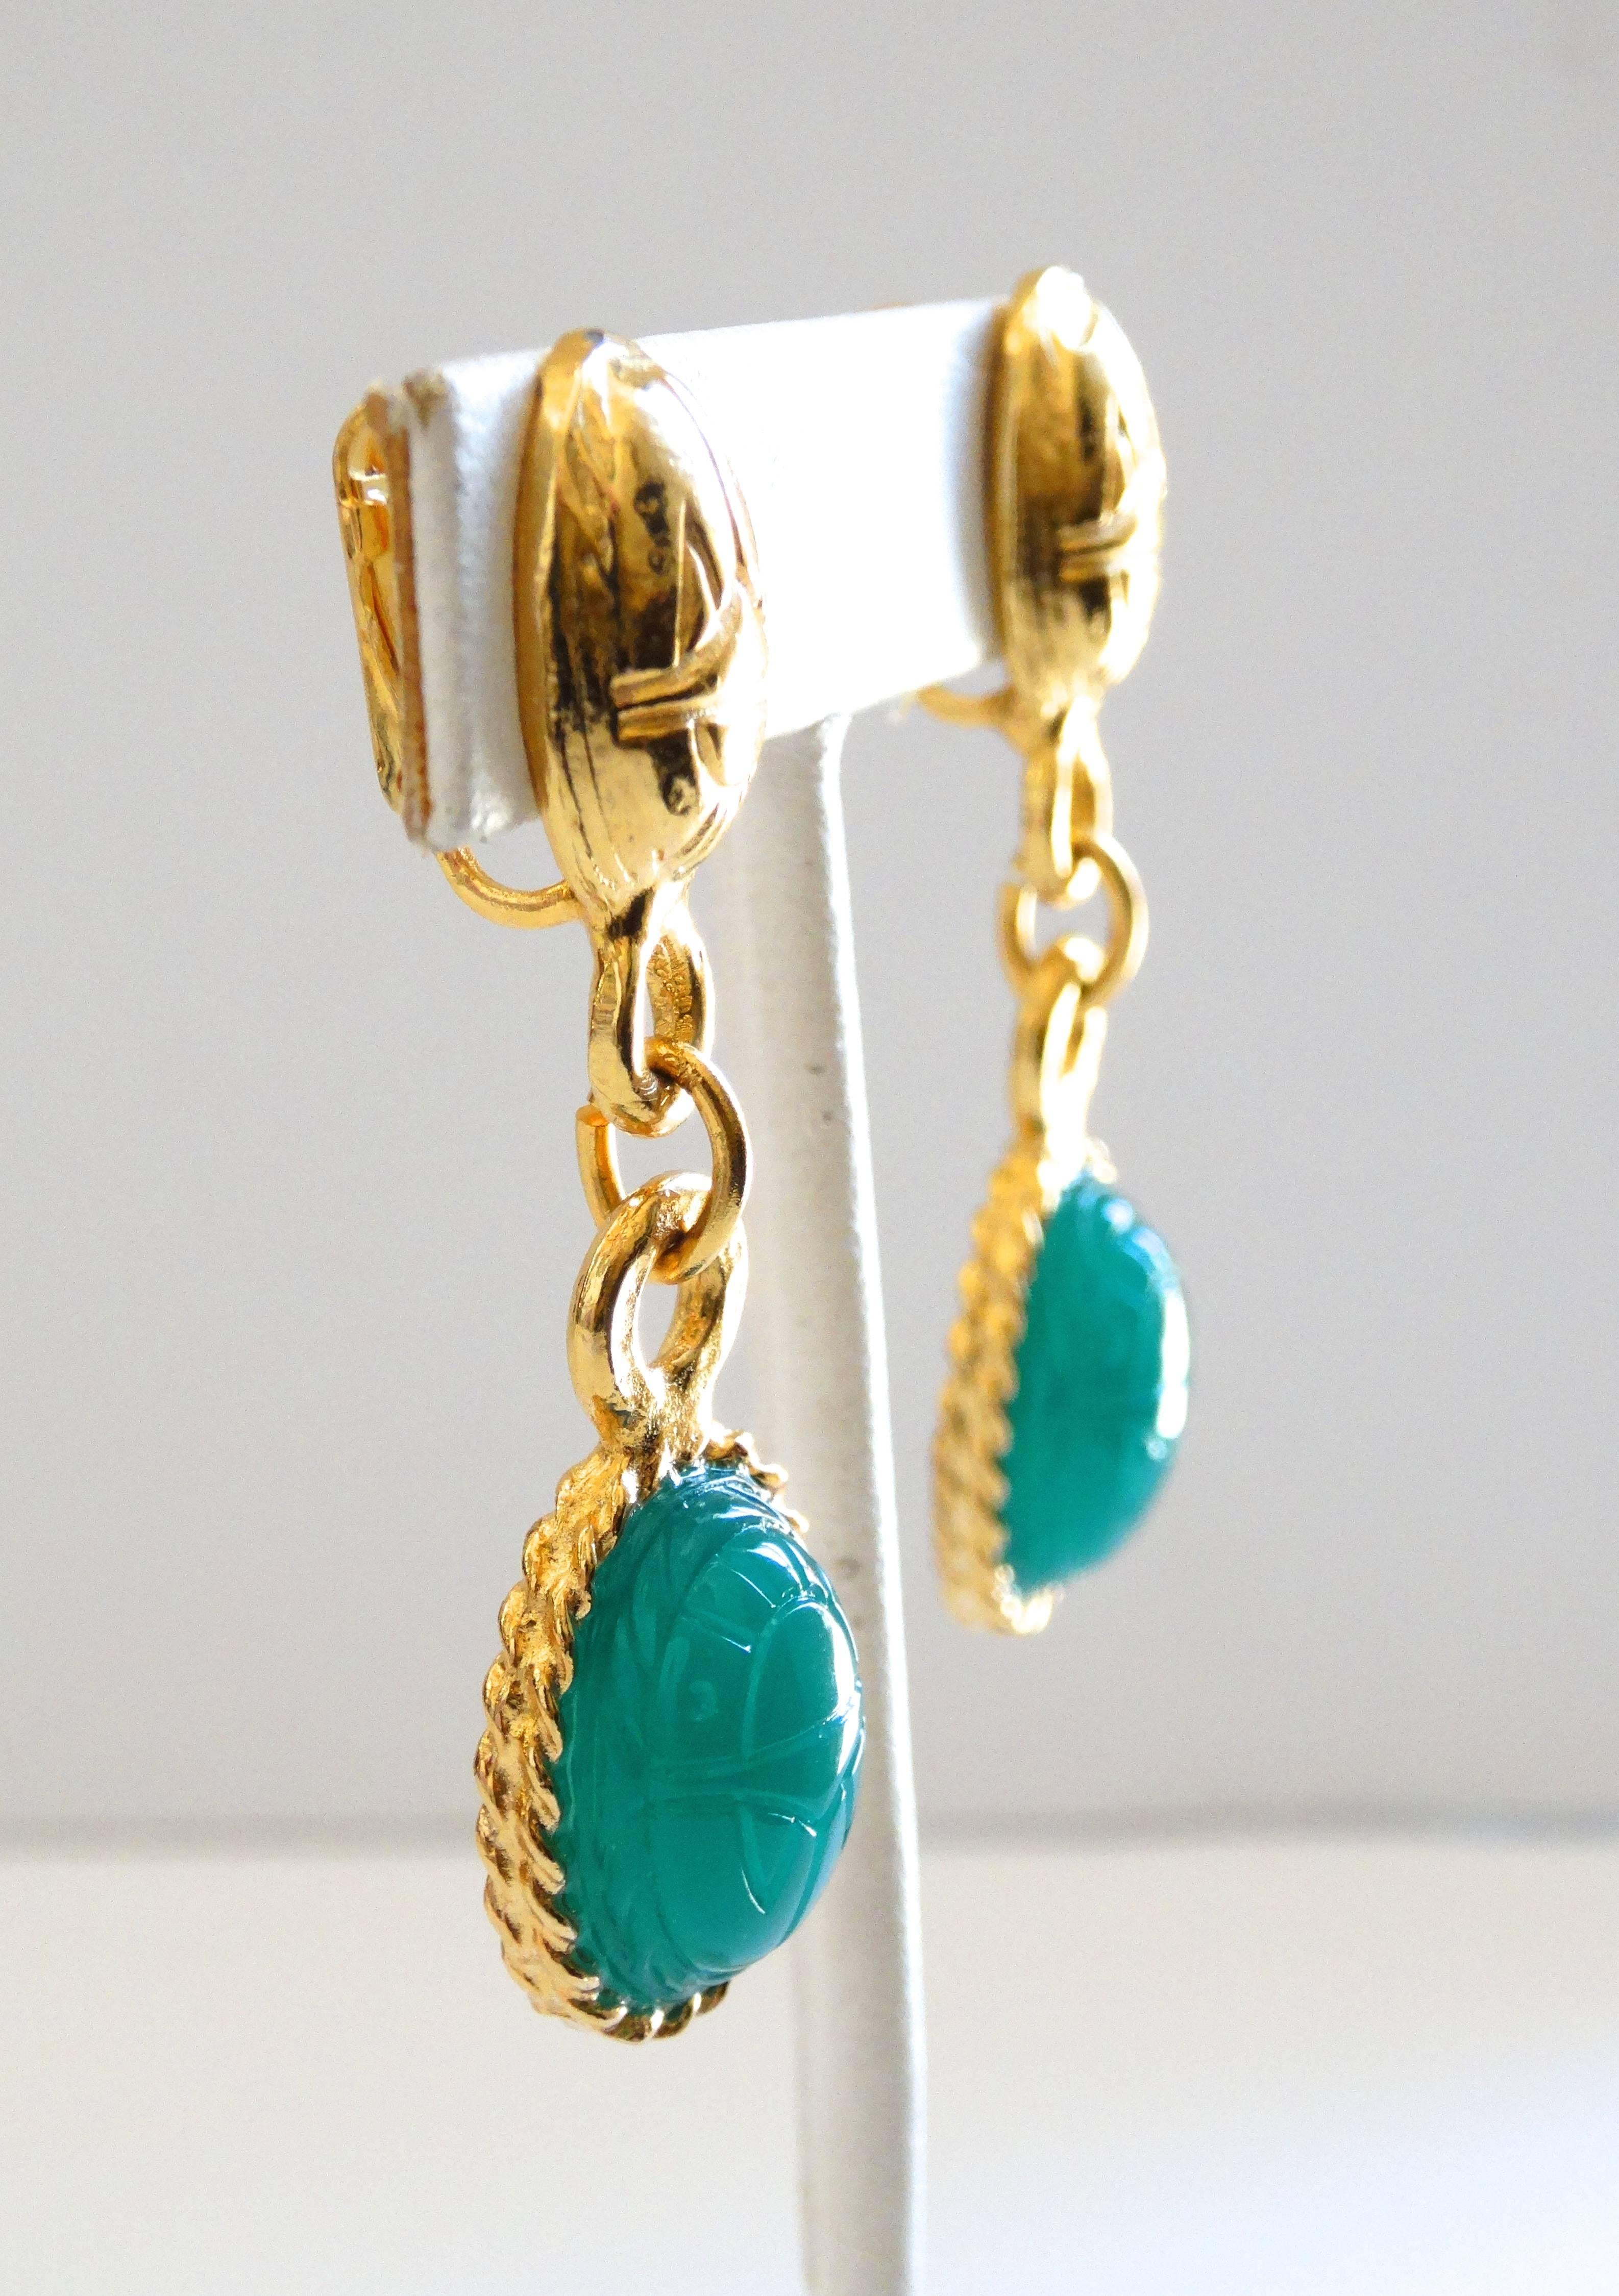 Amazing vintage Kenneth J Lane dangly earrings! Gold metal jewel scarab beetle style post with contrasting beetle charm in a semi-translucent green. Clip on backs. Signed Kenneth J Lane on the backs of each earring. 


Length:  2 in 
Width: .5 in 